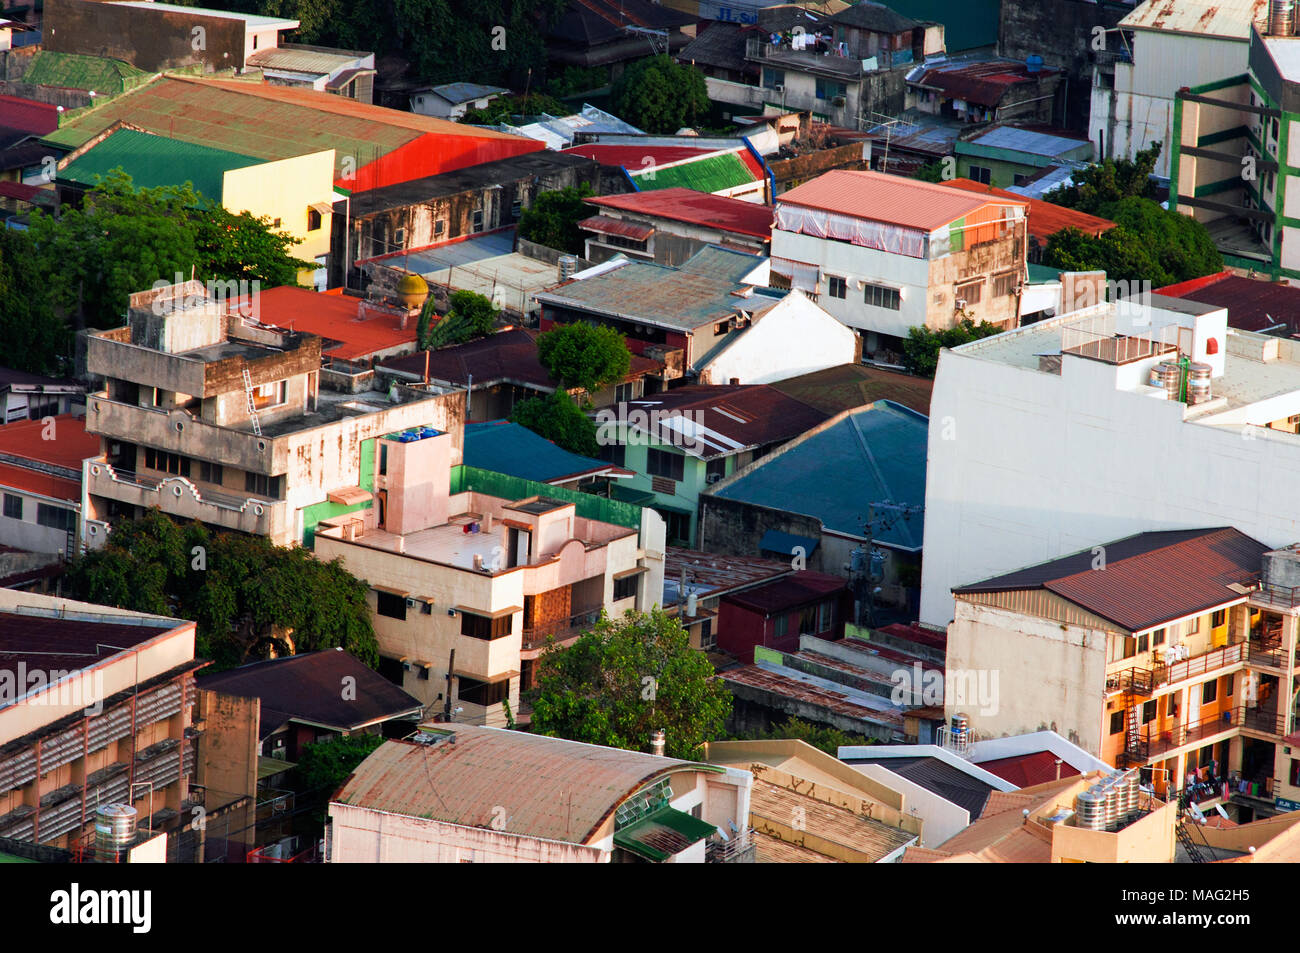 Aerial view of Cebu City looking northeast, featuring low rise buildings and dwellings, Philippines Stock Photo